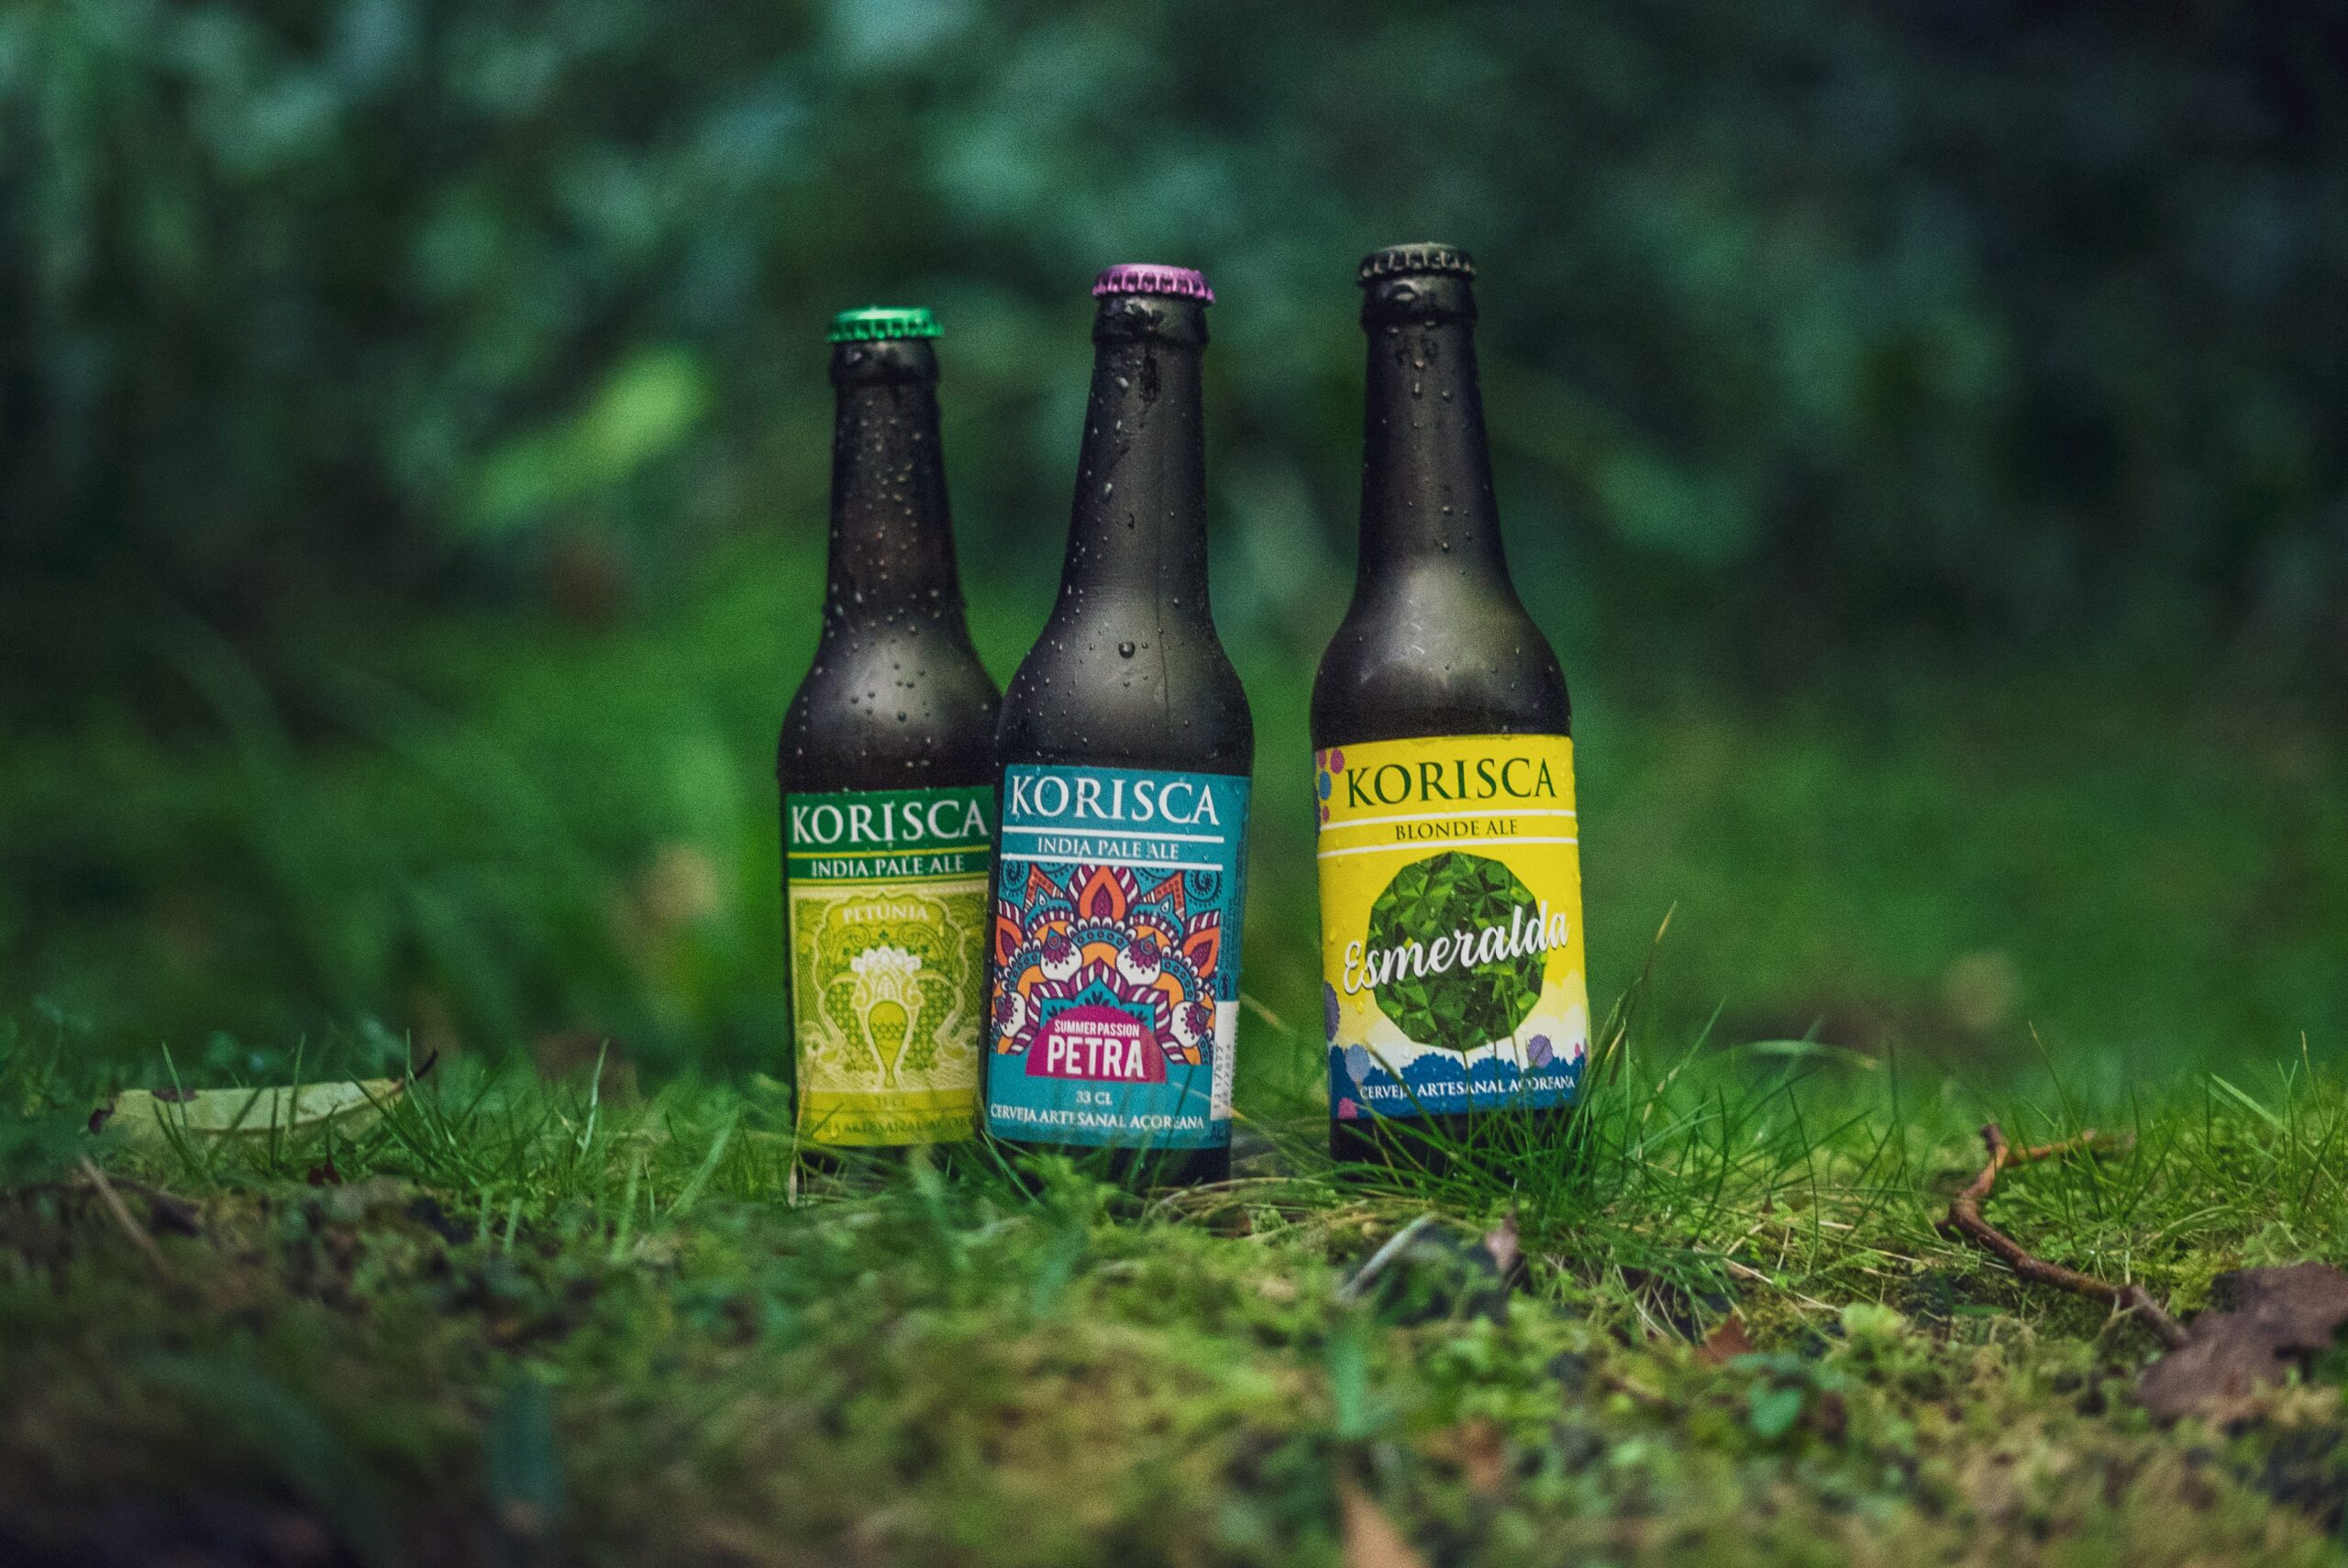 Three Korisca Azorean craft beers, Petúnia (IPA), Petra (IPA) and Esmeralda (Blonde Ale), on a floor with green grass and in the background green vegetation, in Sete Cidades, Ponta Delgada, São Miguel, Azores.